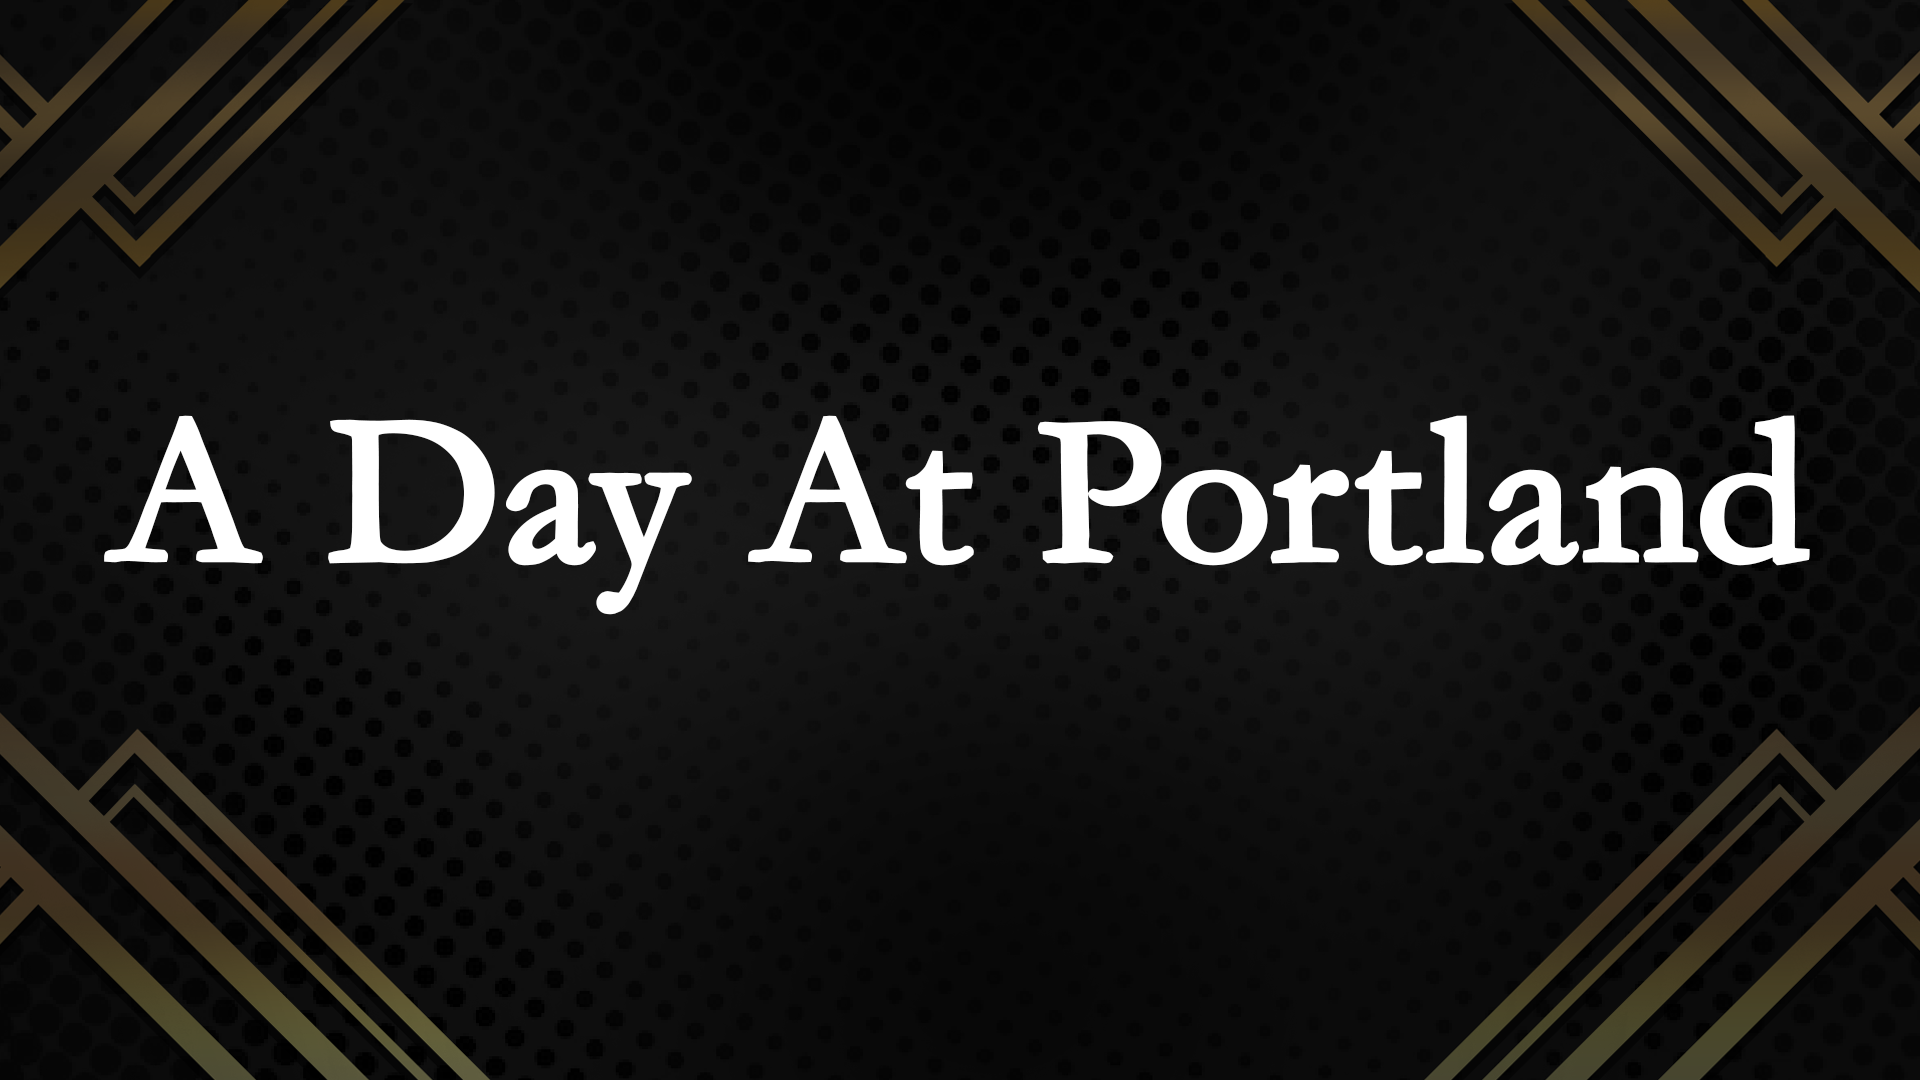 A day at Portland